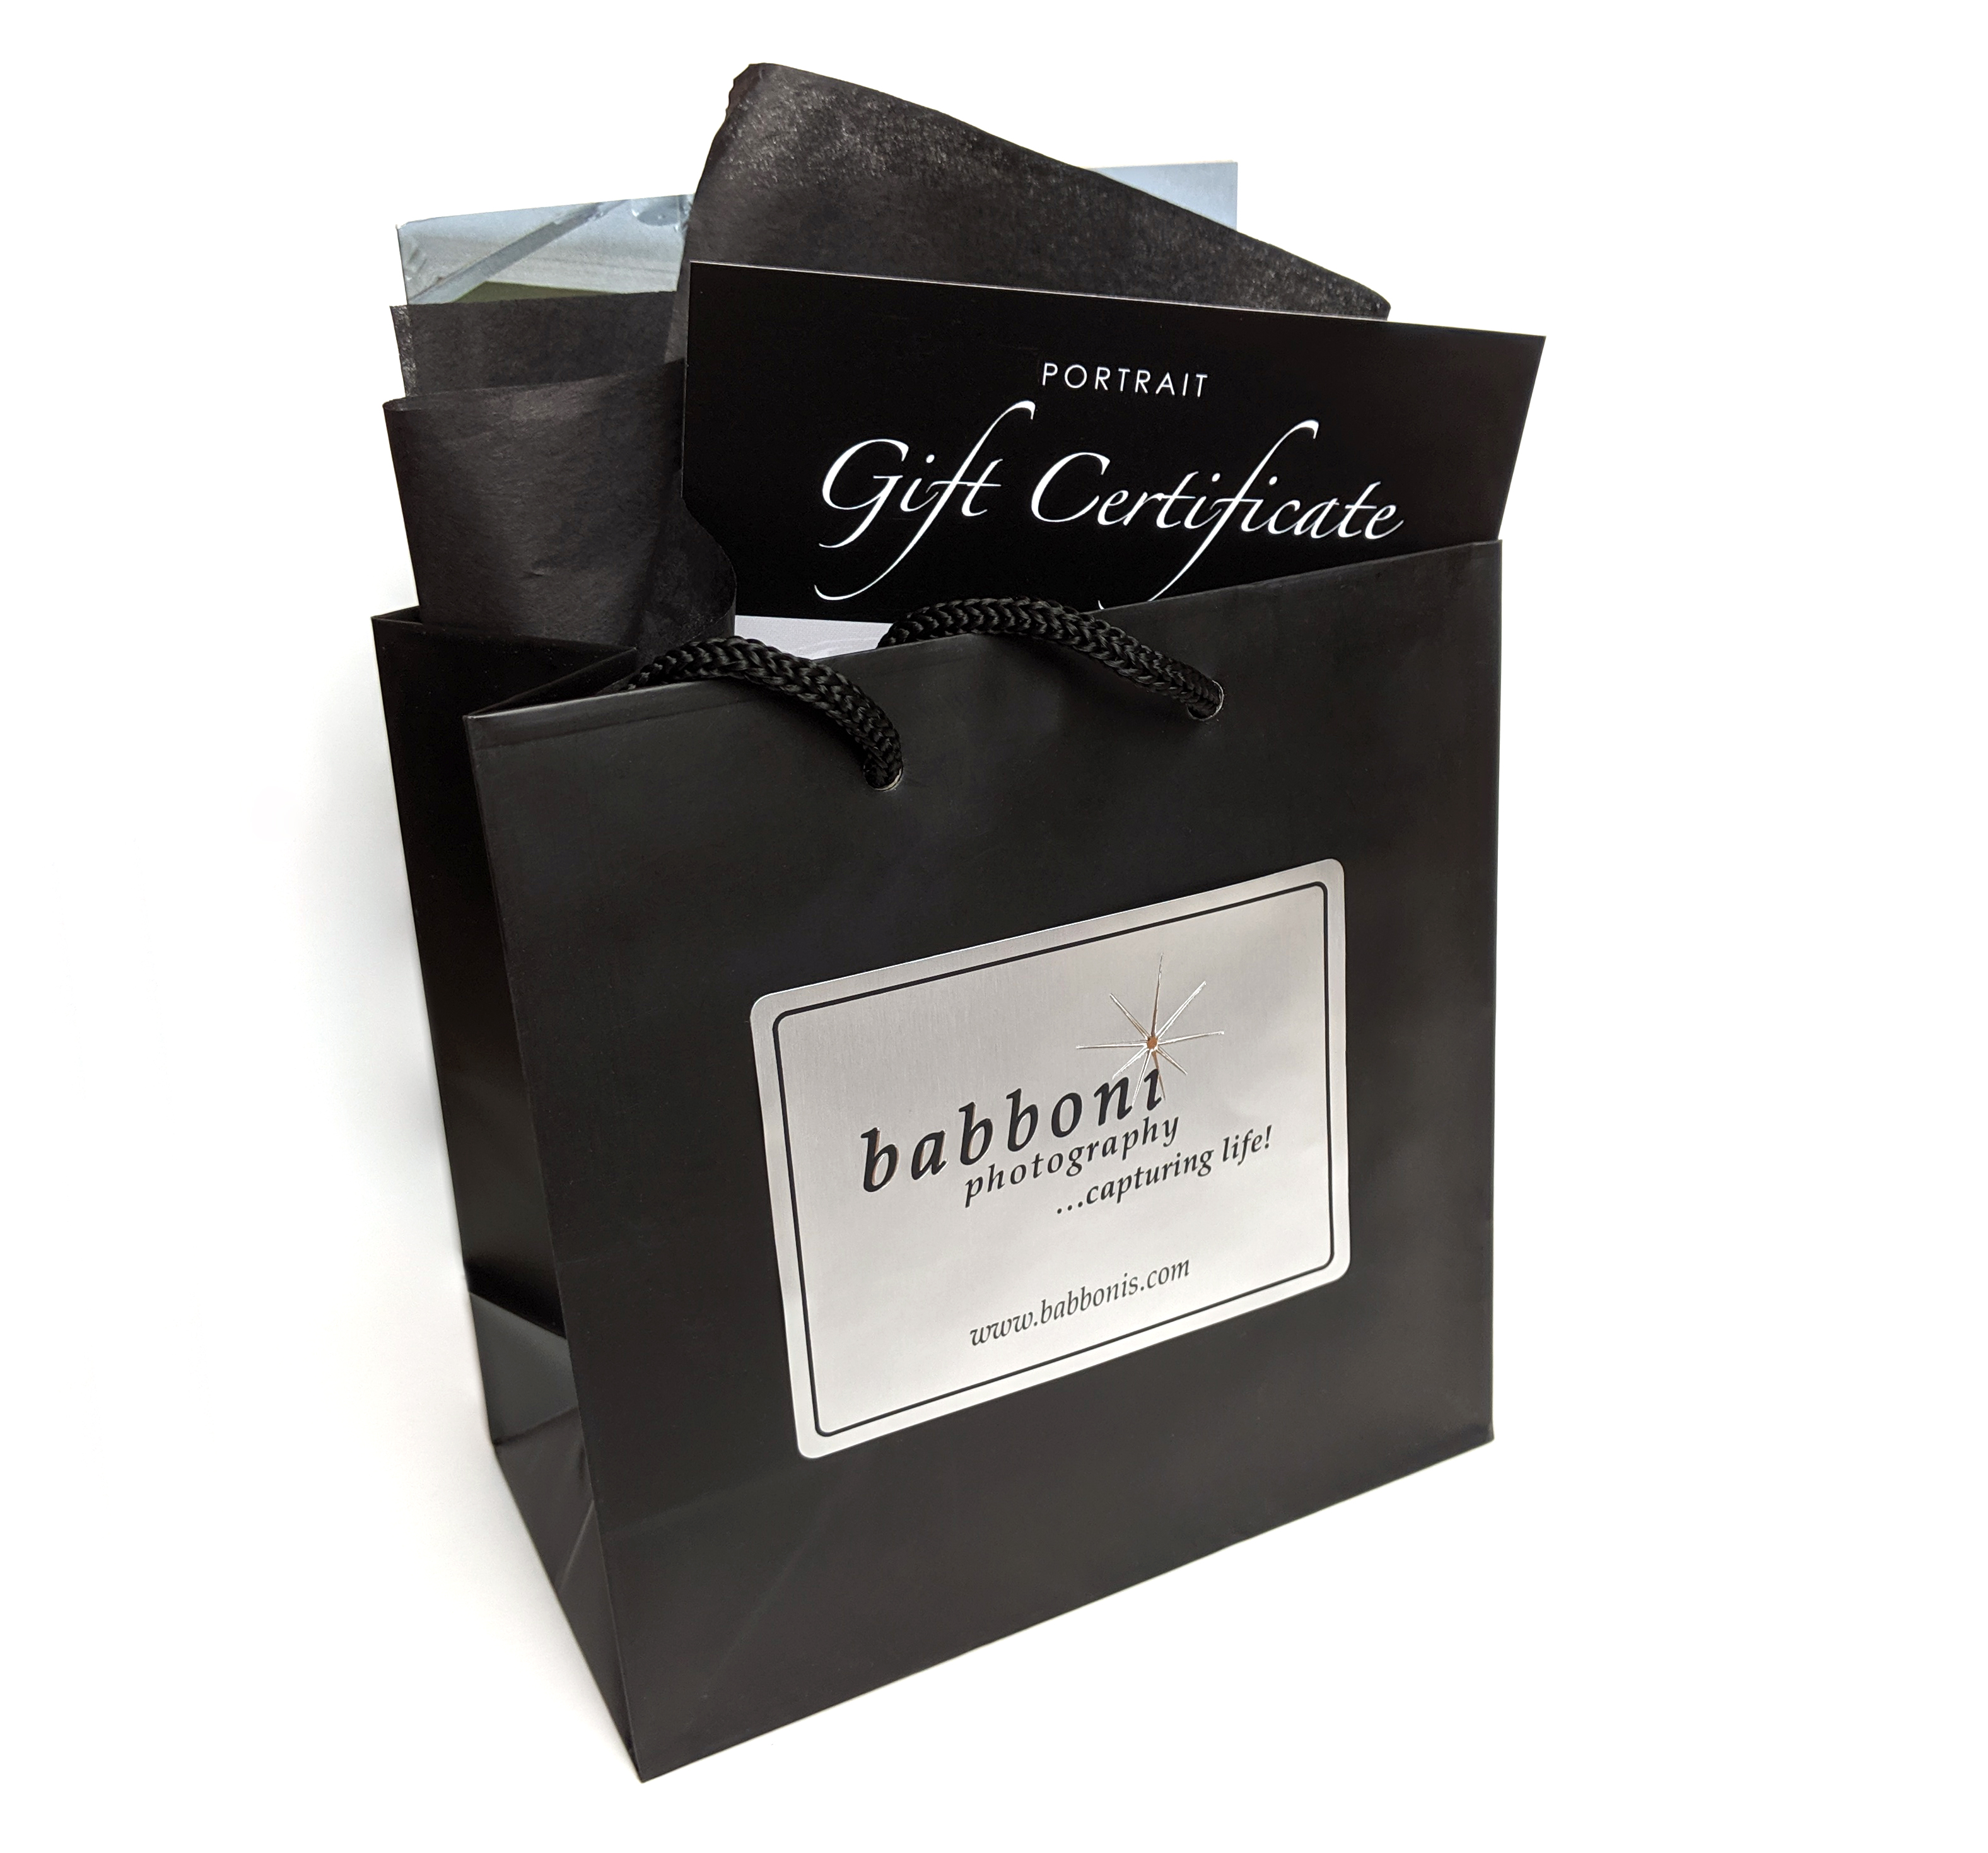 Babboni Holiday Gift Certificate